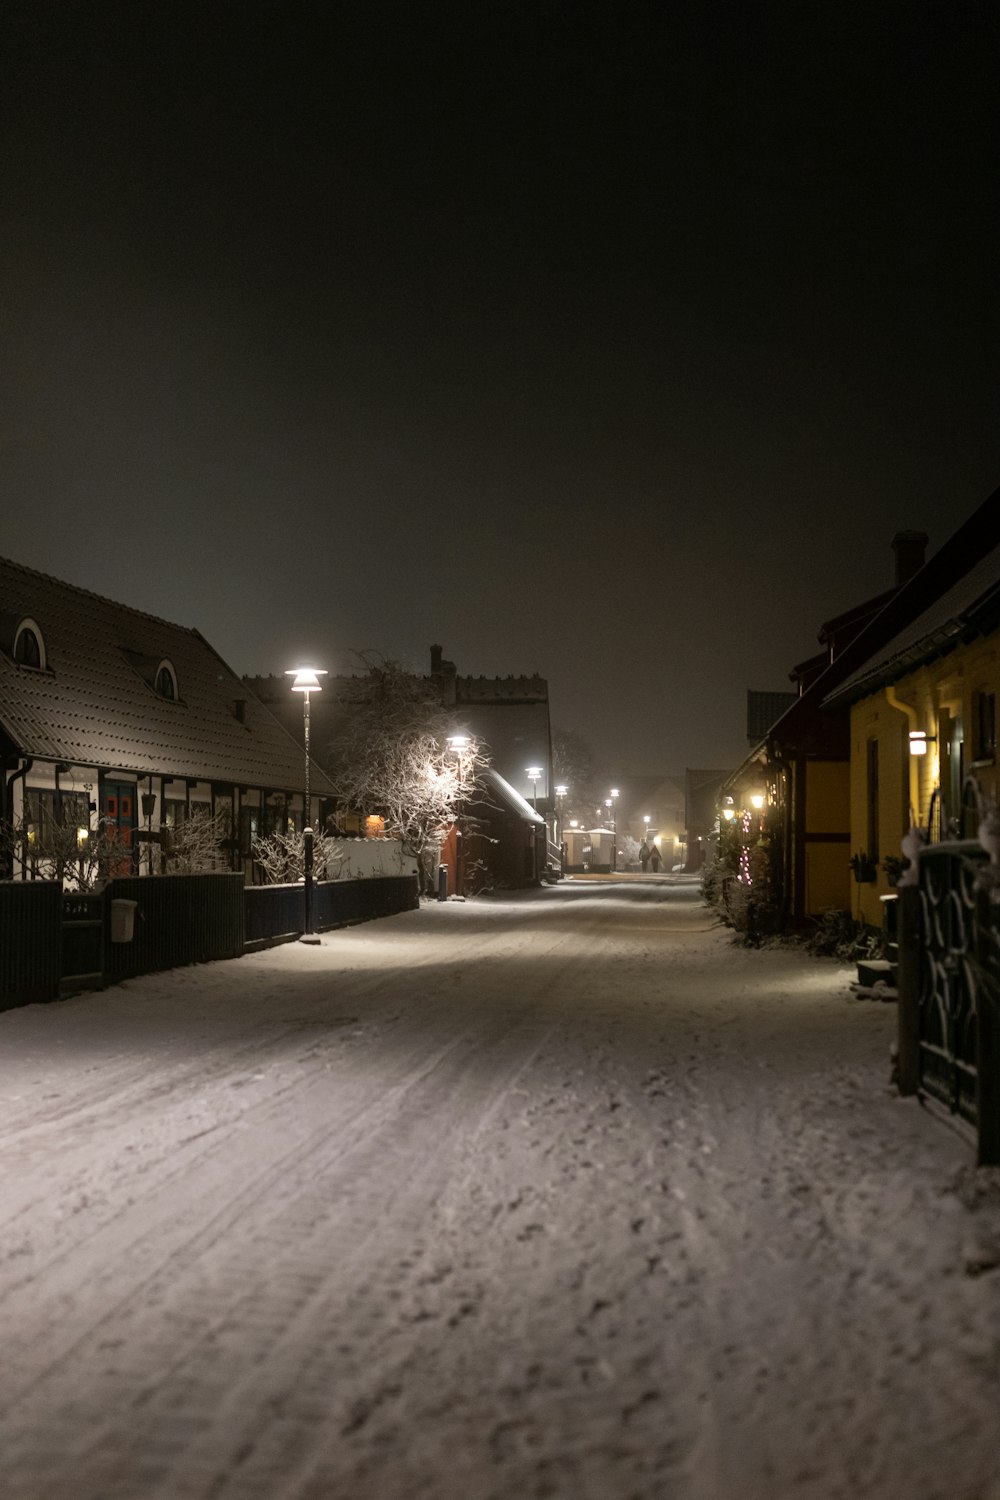 a snowy street at night with a bench in the foreground